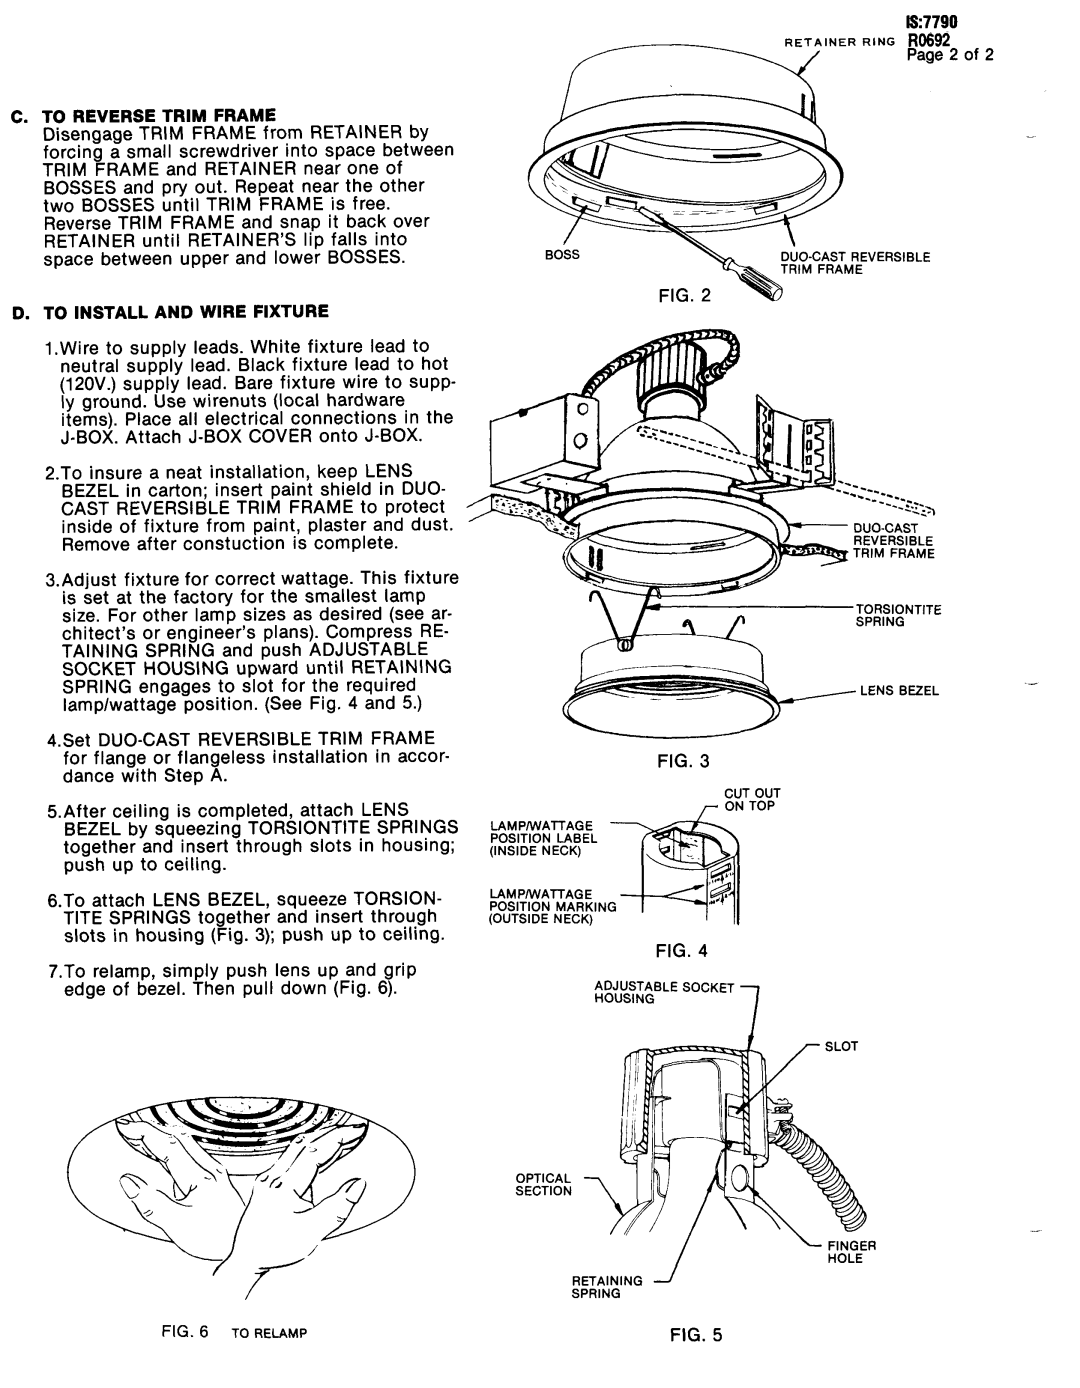 Lightolier instruction sheet c.TO REVERSE TRIM FRAME, D.To Install And Wire Fixture, IS7790, Page 2 of 